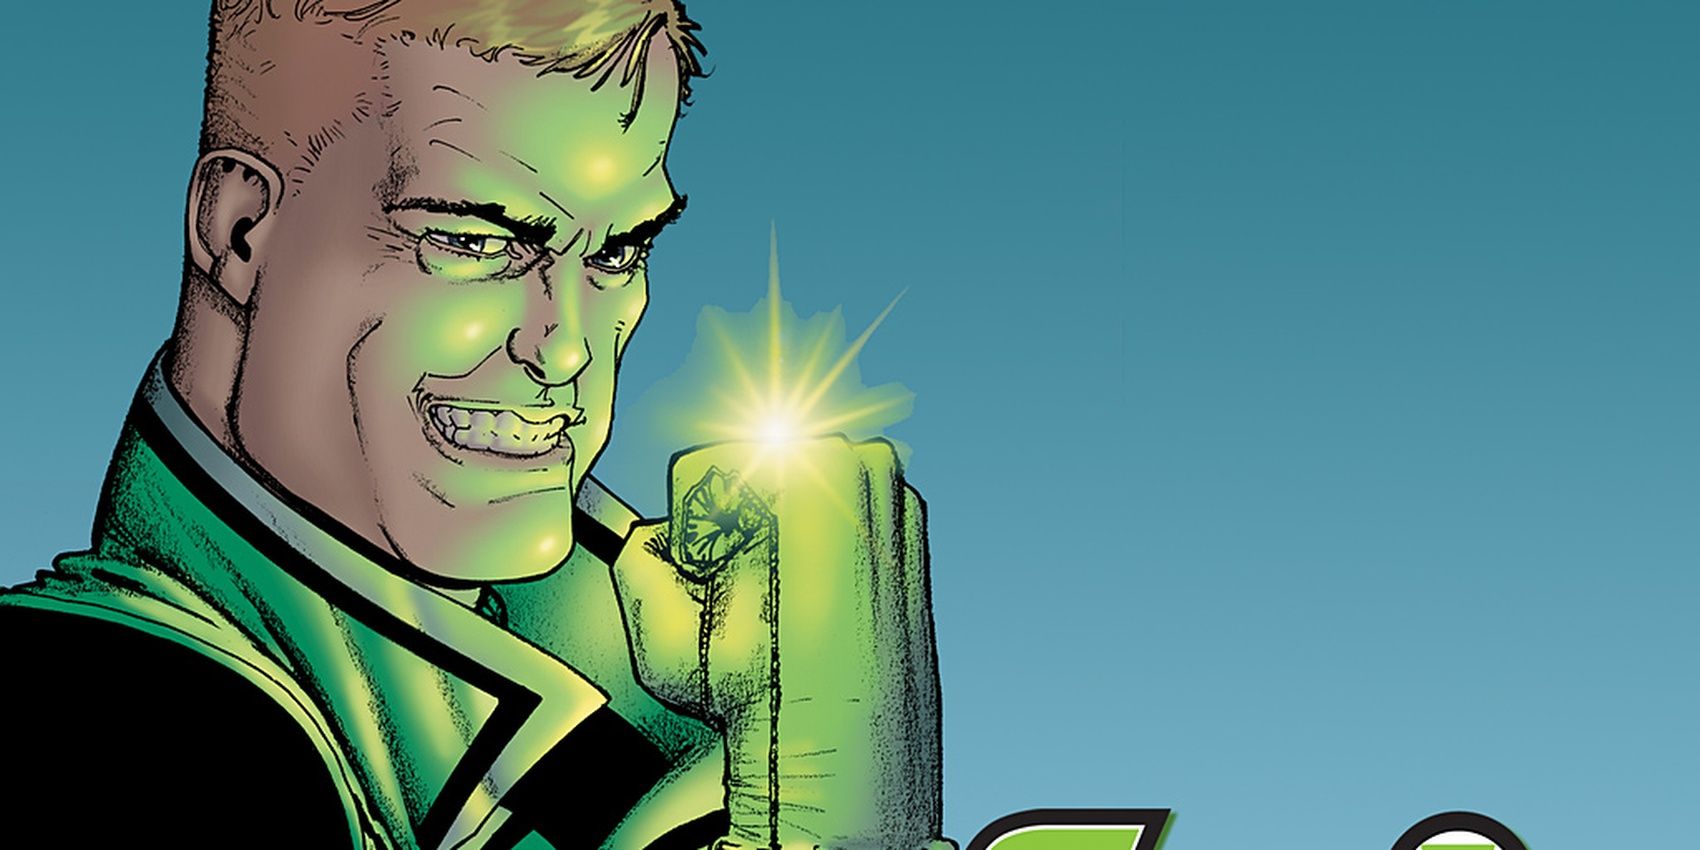 Guy smiles with his Green Lantern power ring